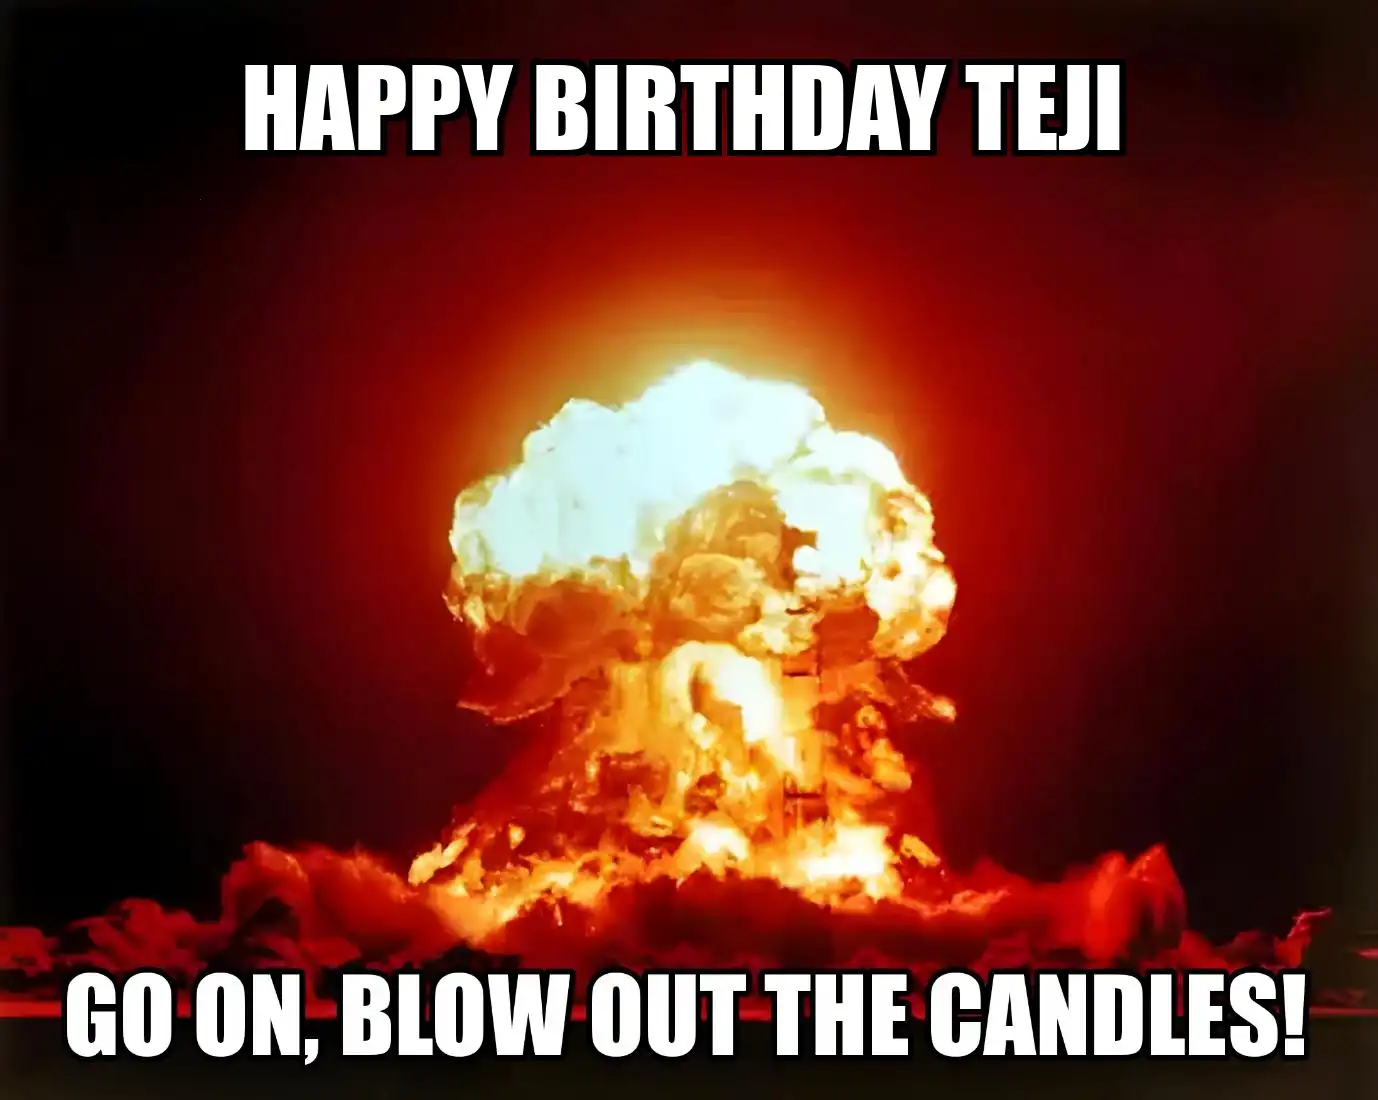 Happy Birthday Teji Go On Blow Out The Candles Meme